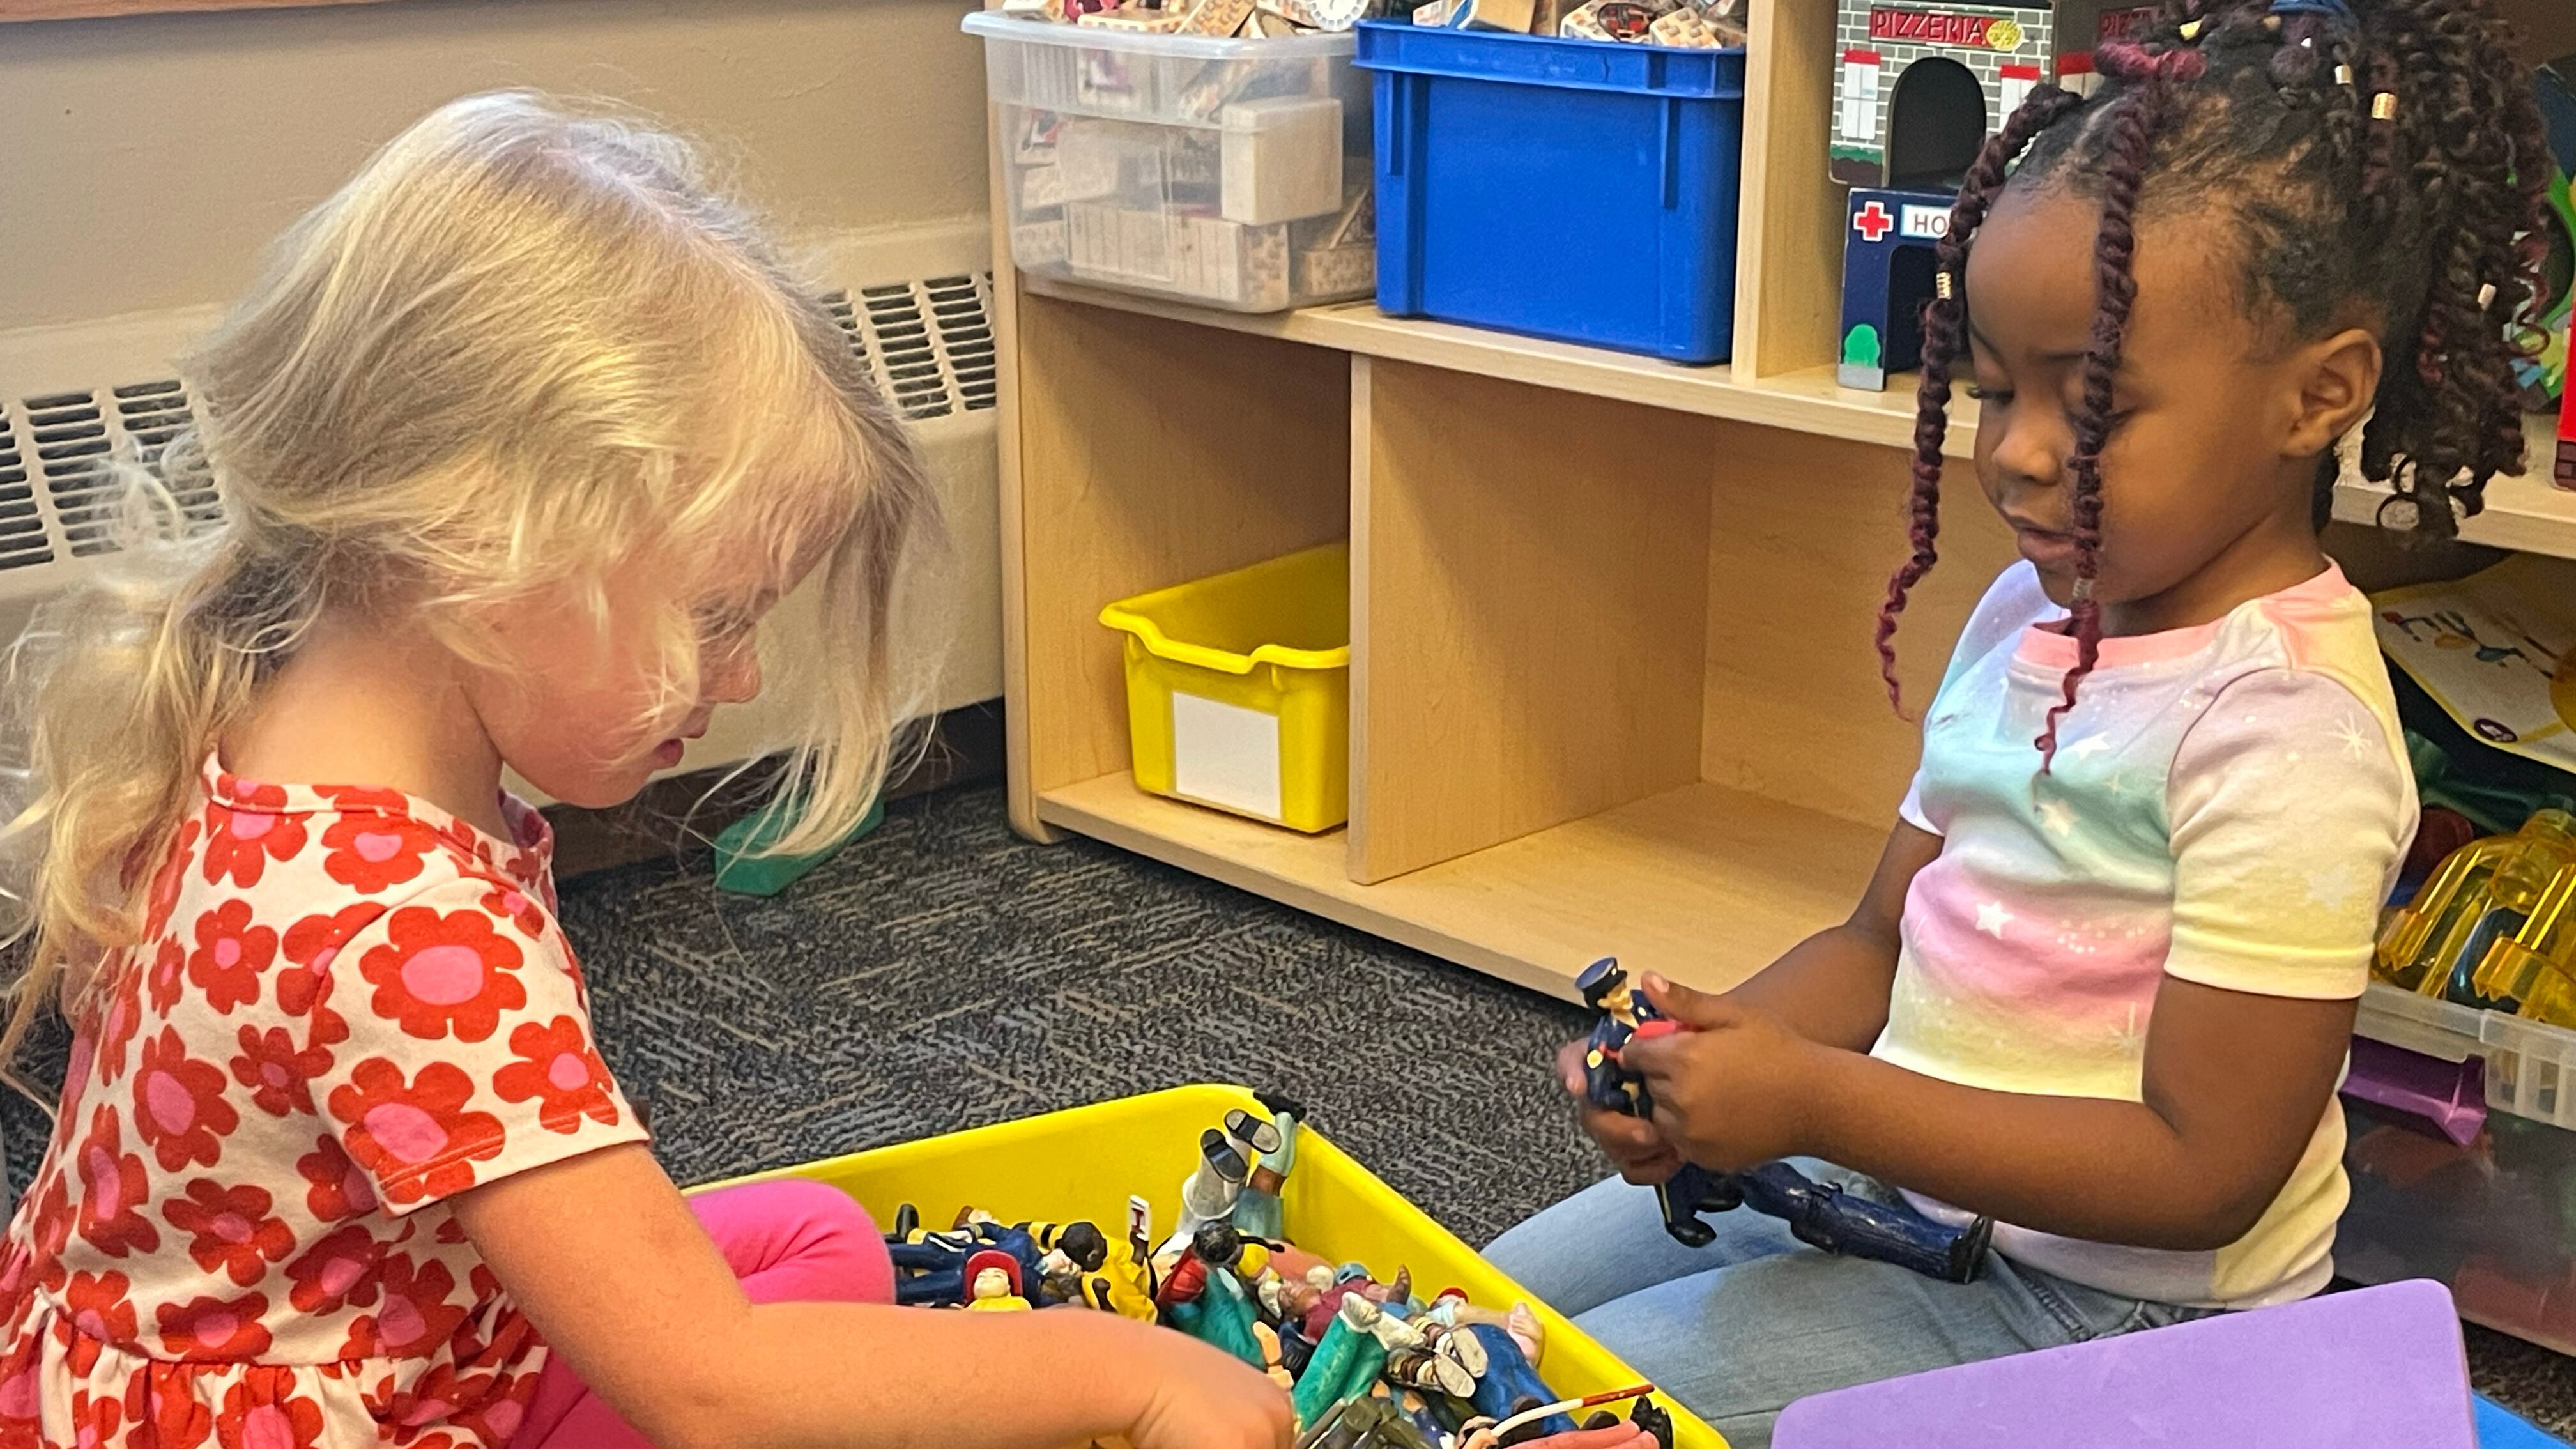 Two preschool girls play with toys from a yellow bin sitting between them.